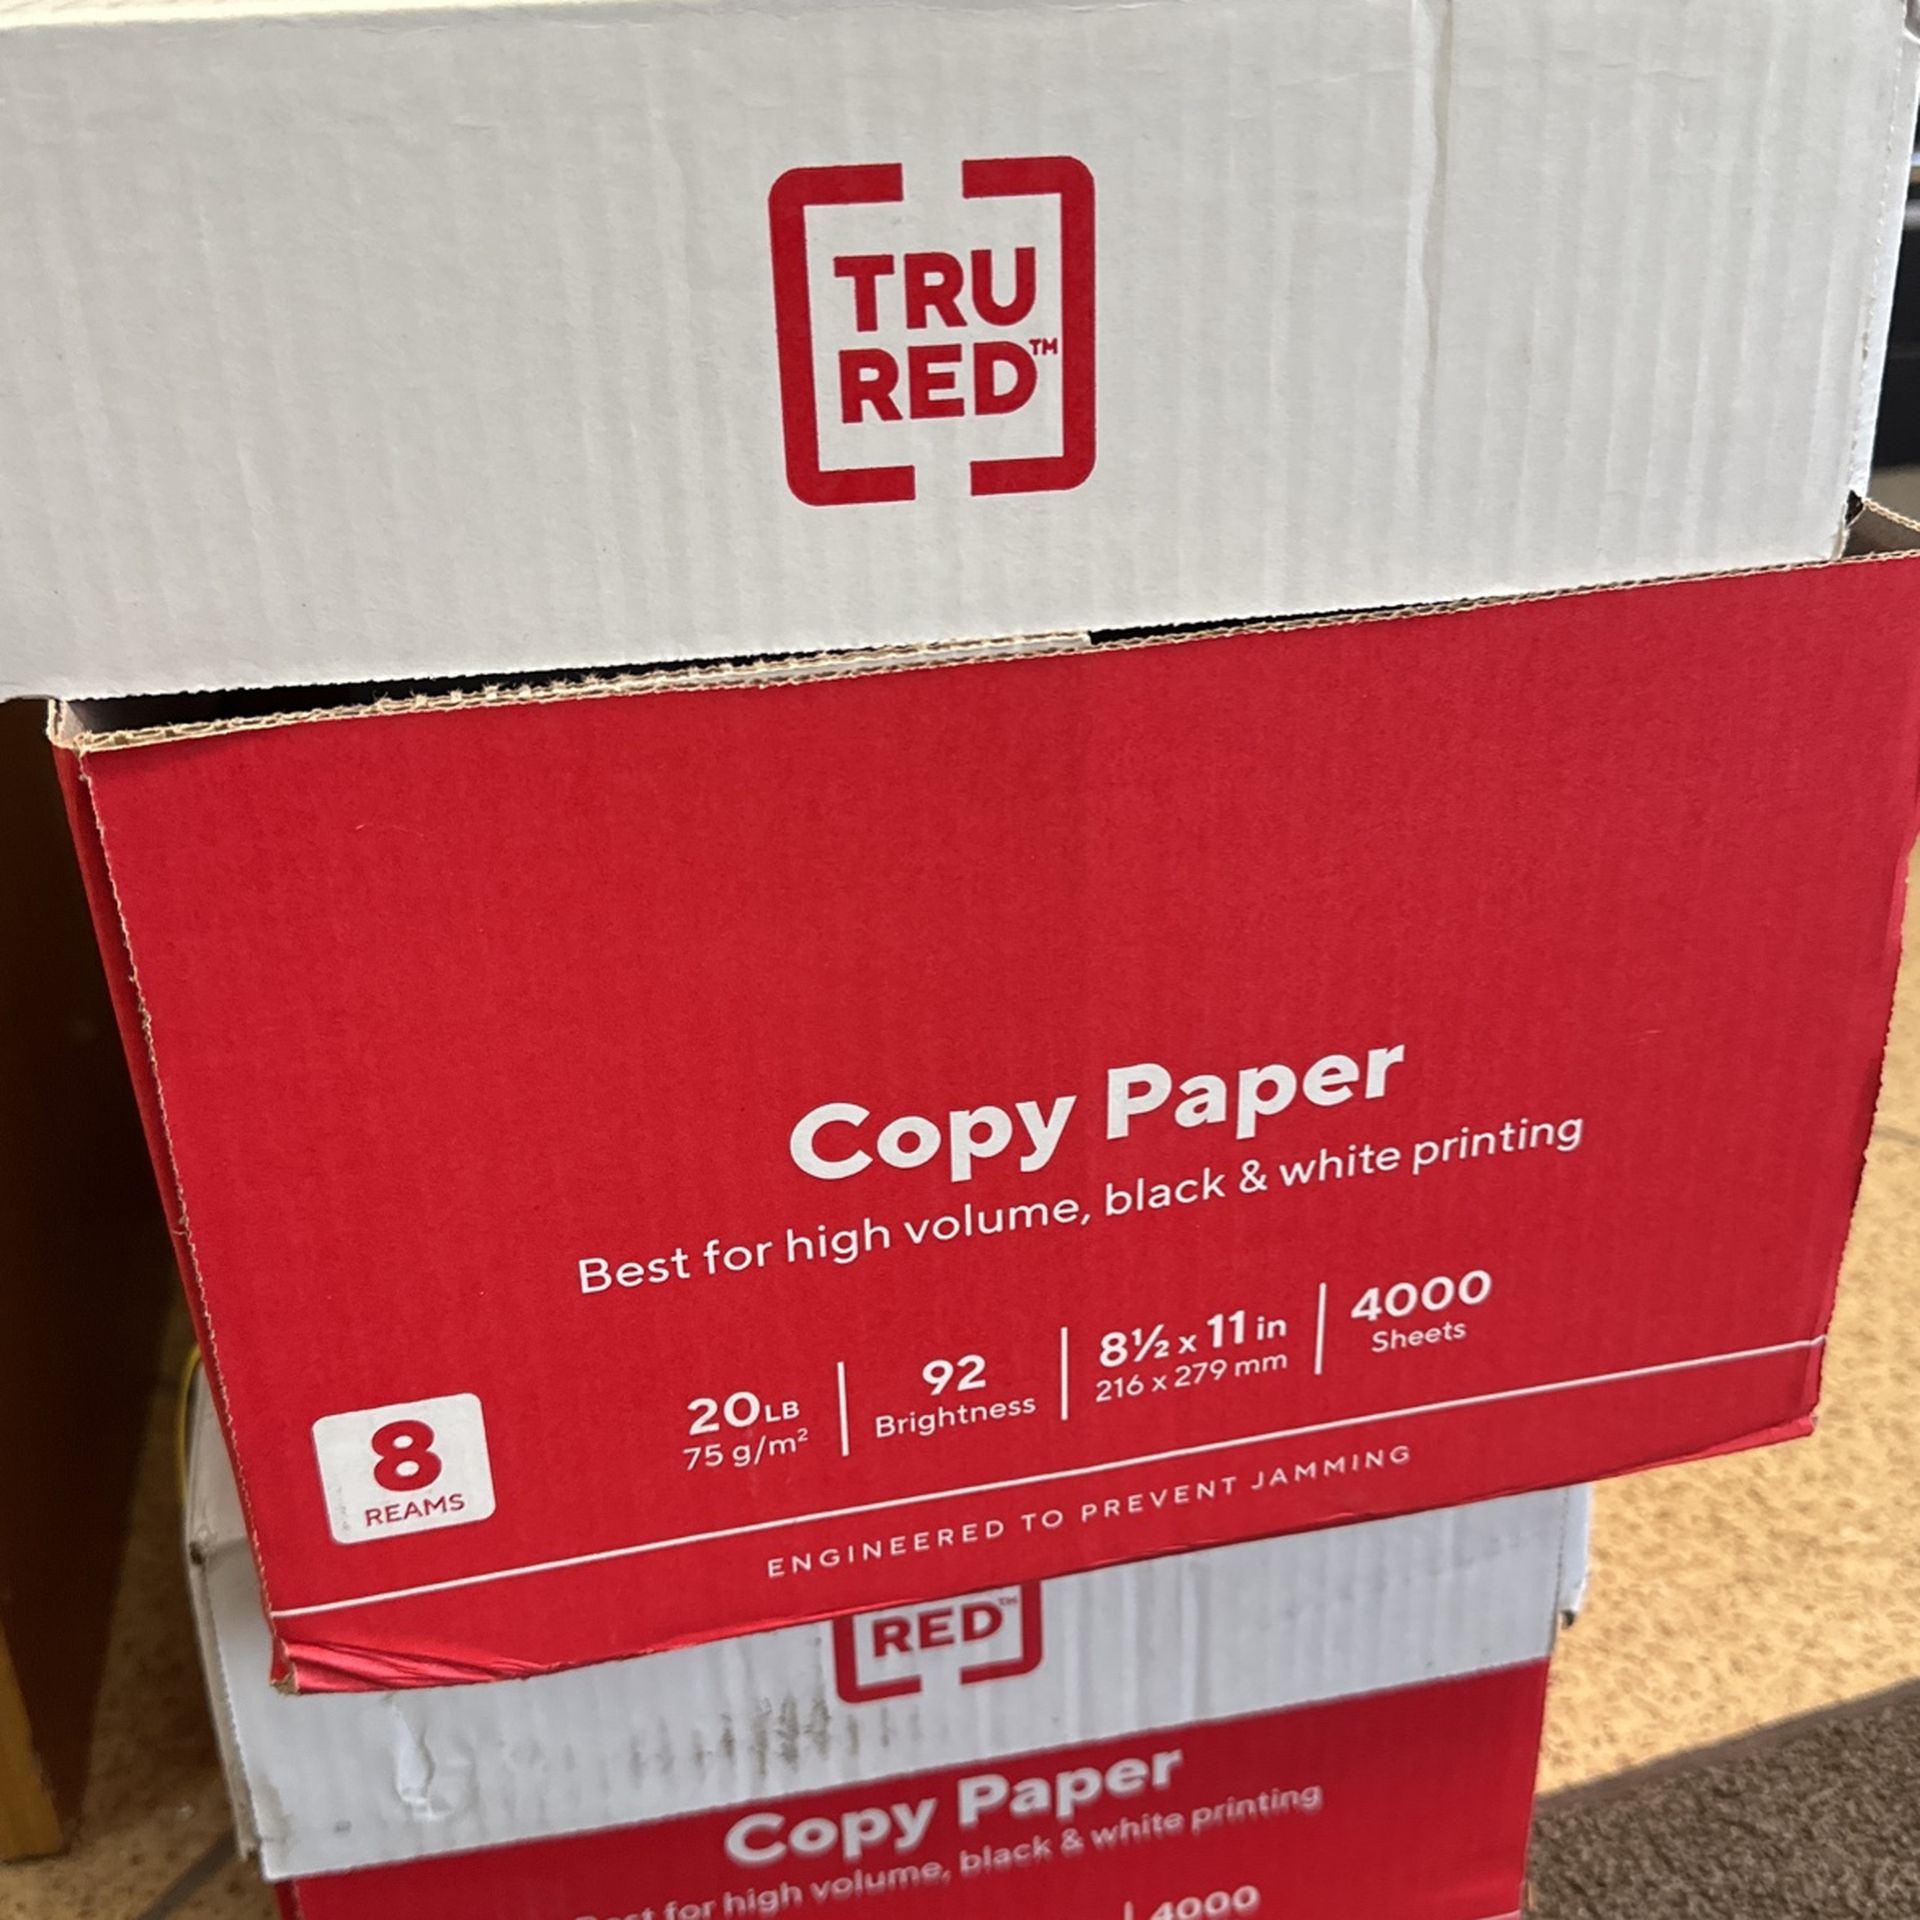 Tru Red Copy Paper From Staples for Sale in Queens, NY - OfferUp